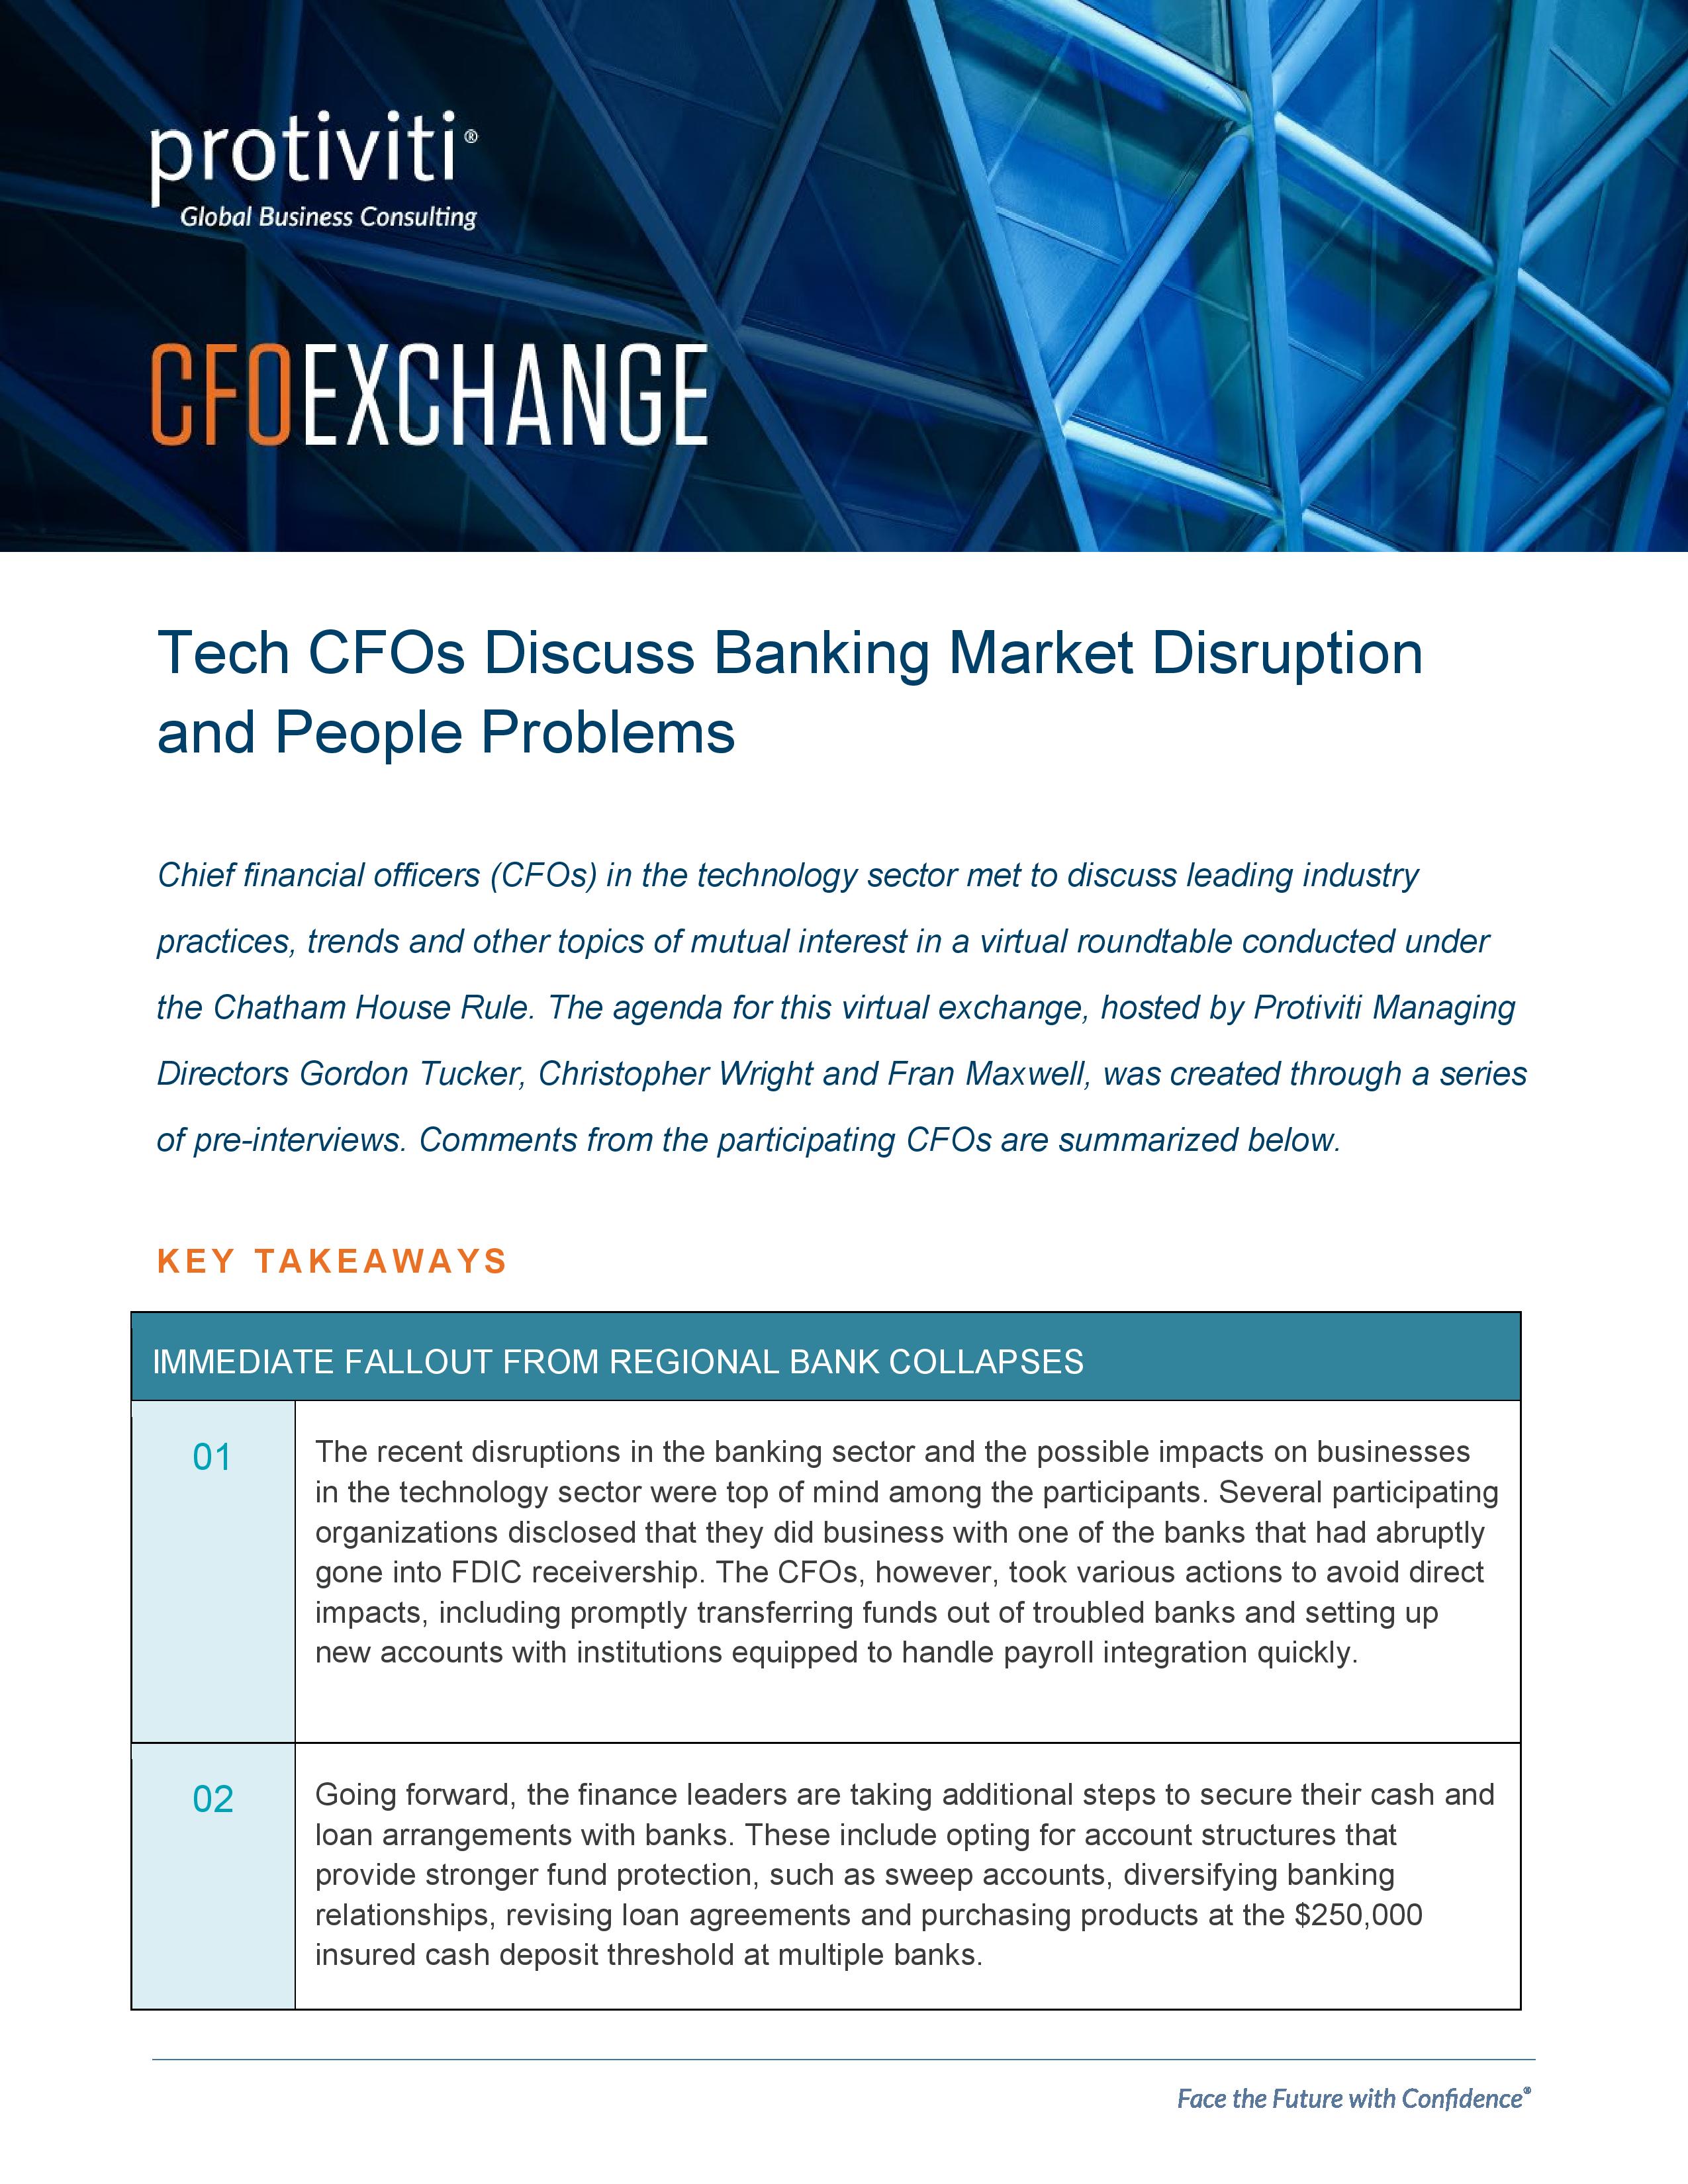 Screenshot of the first page of Tech CFOs Discuss Banking Market Disruption and People Problems